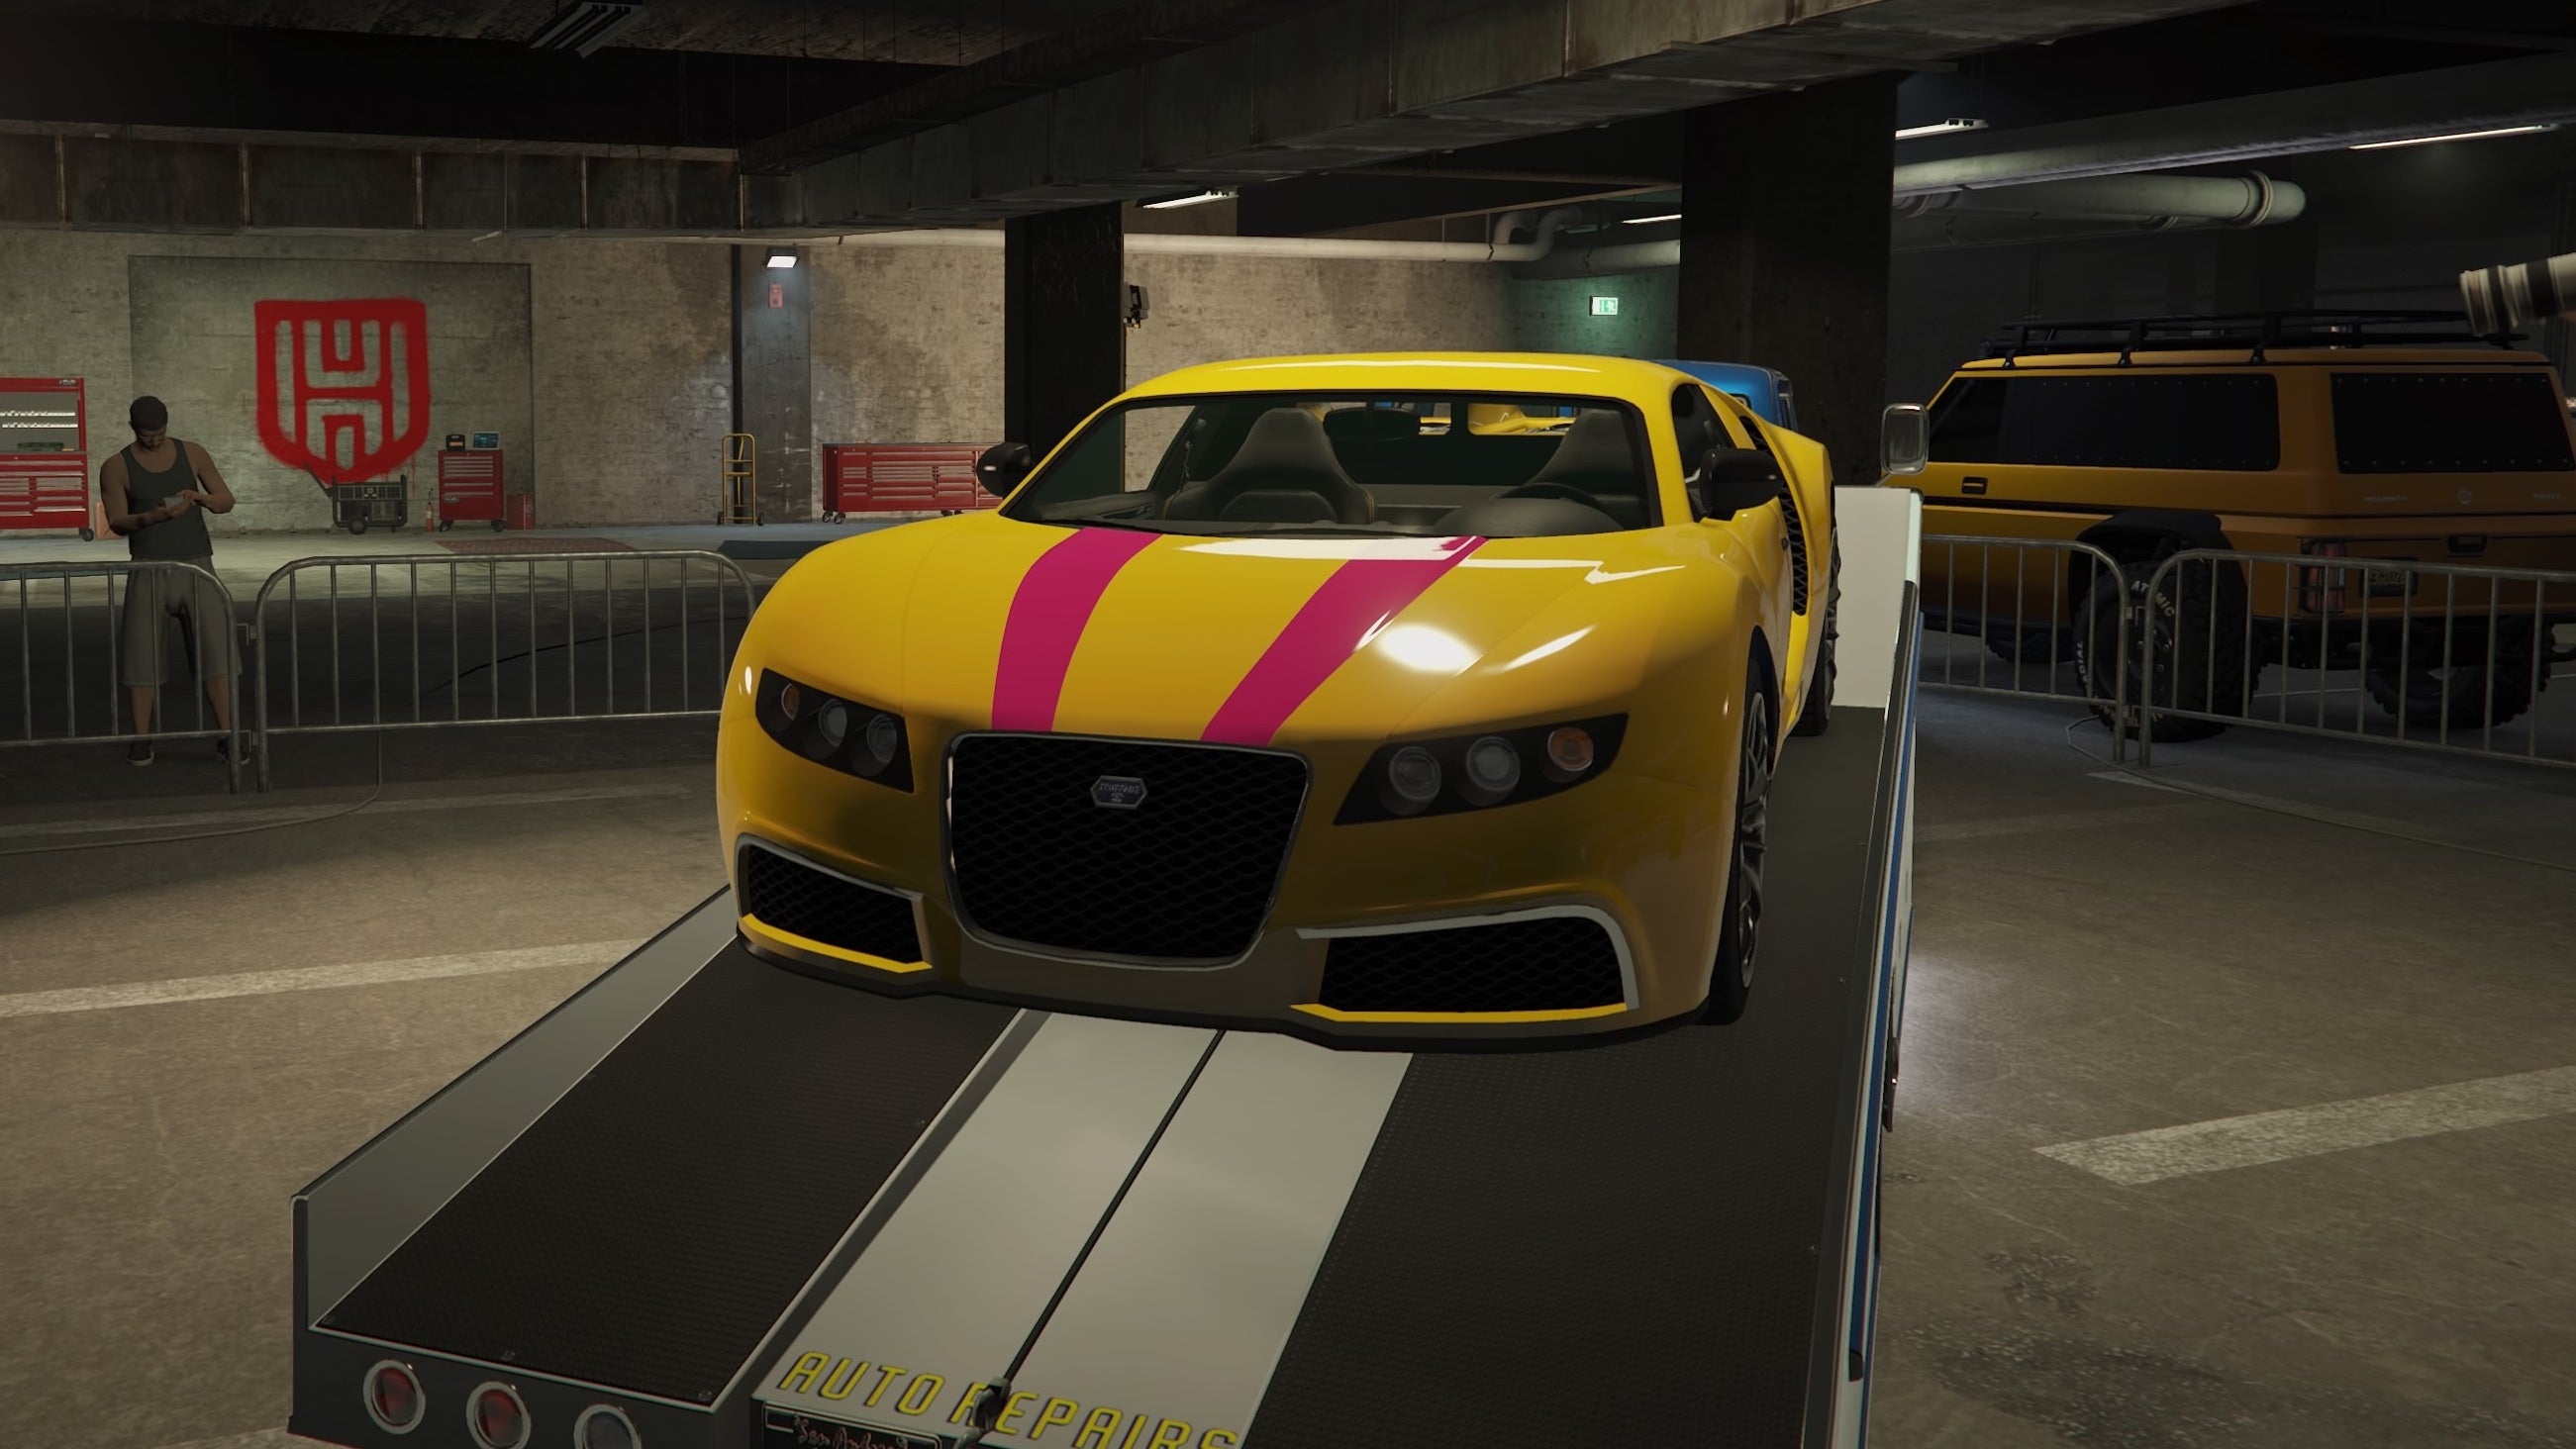 The Adder Prize Ride car in GTA Online